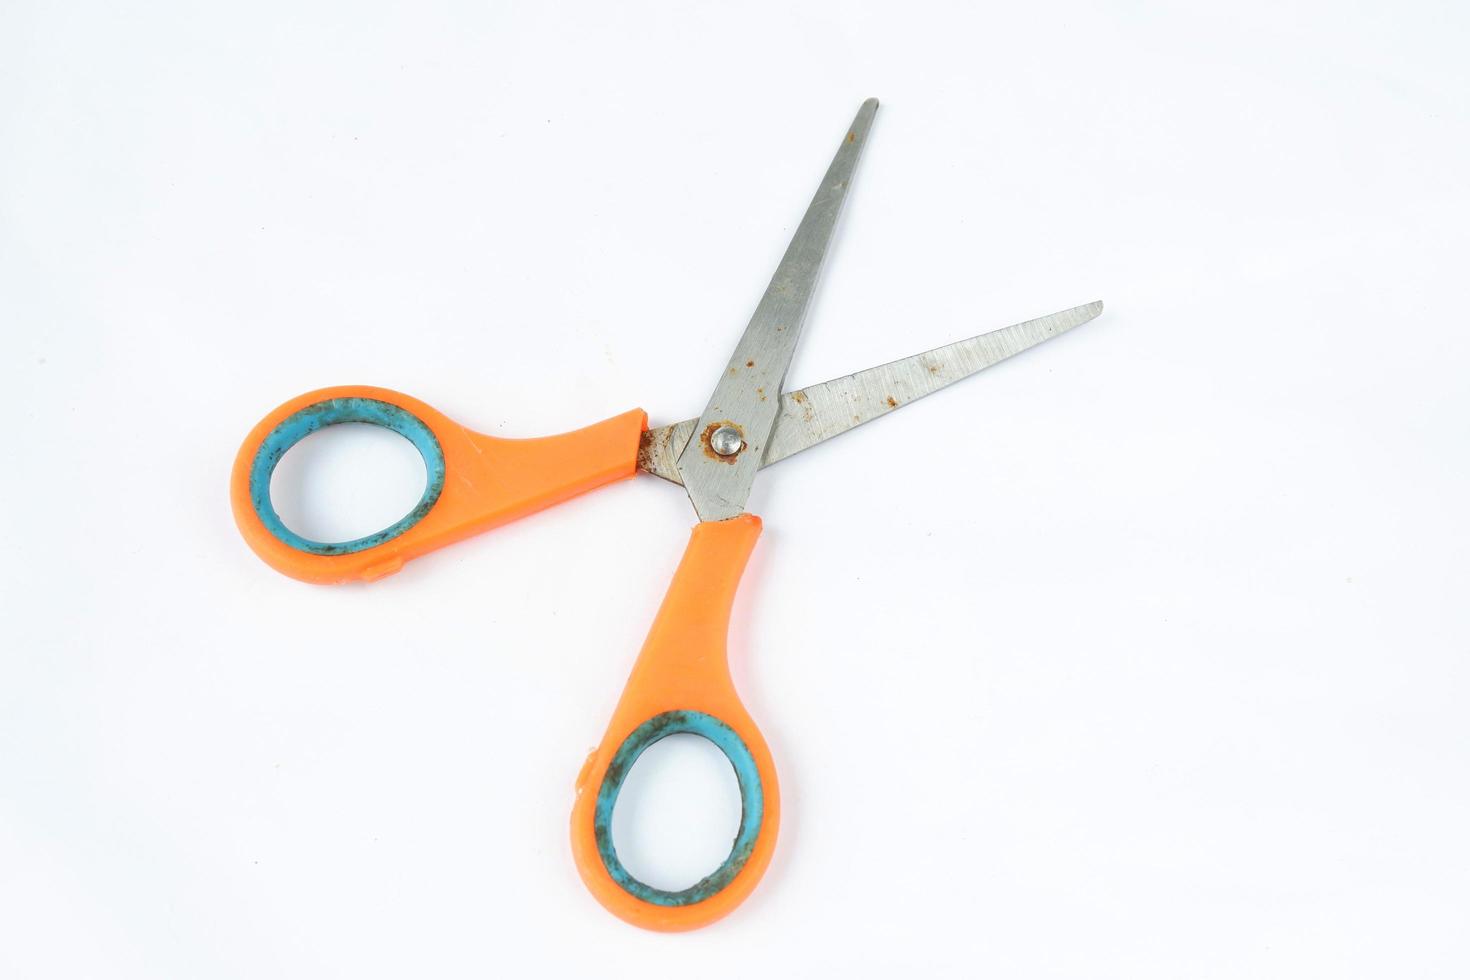 Closeup shot of scissors with orange handles isolated on a white photo